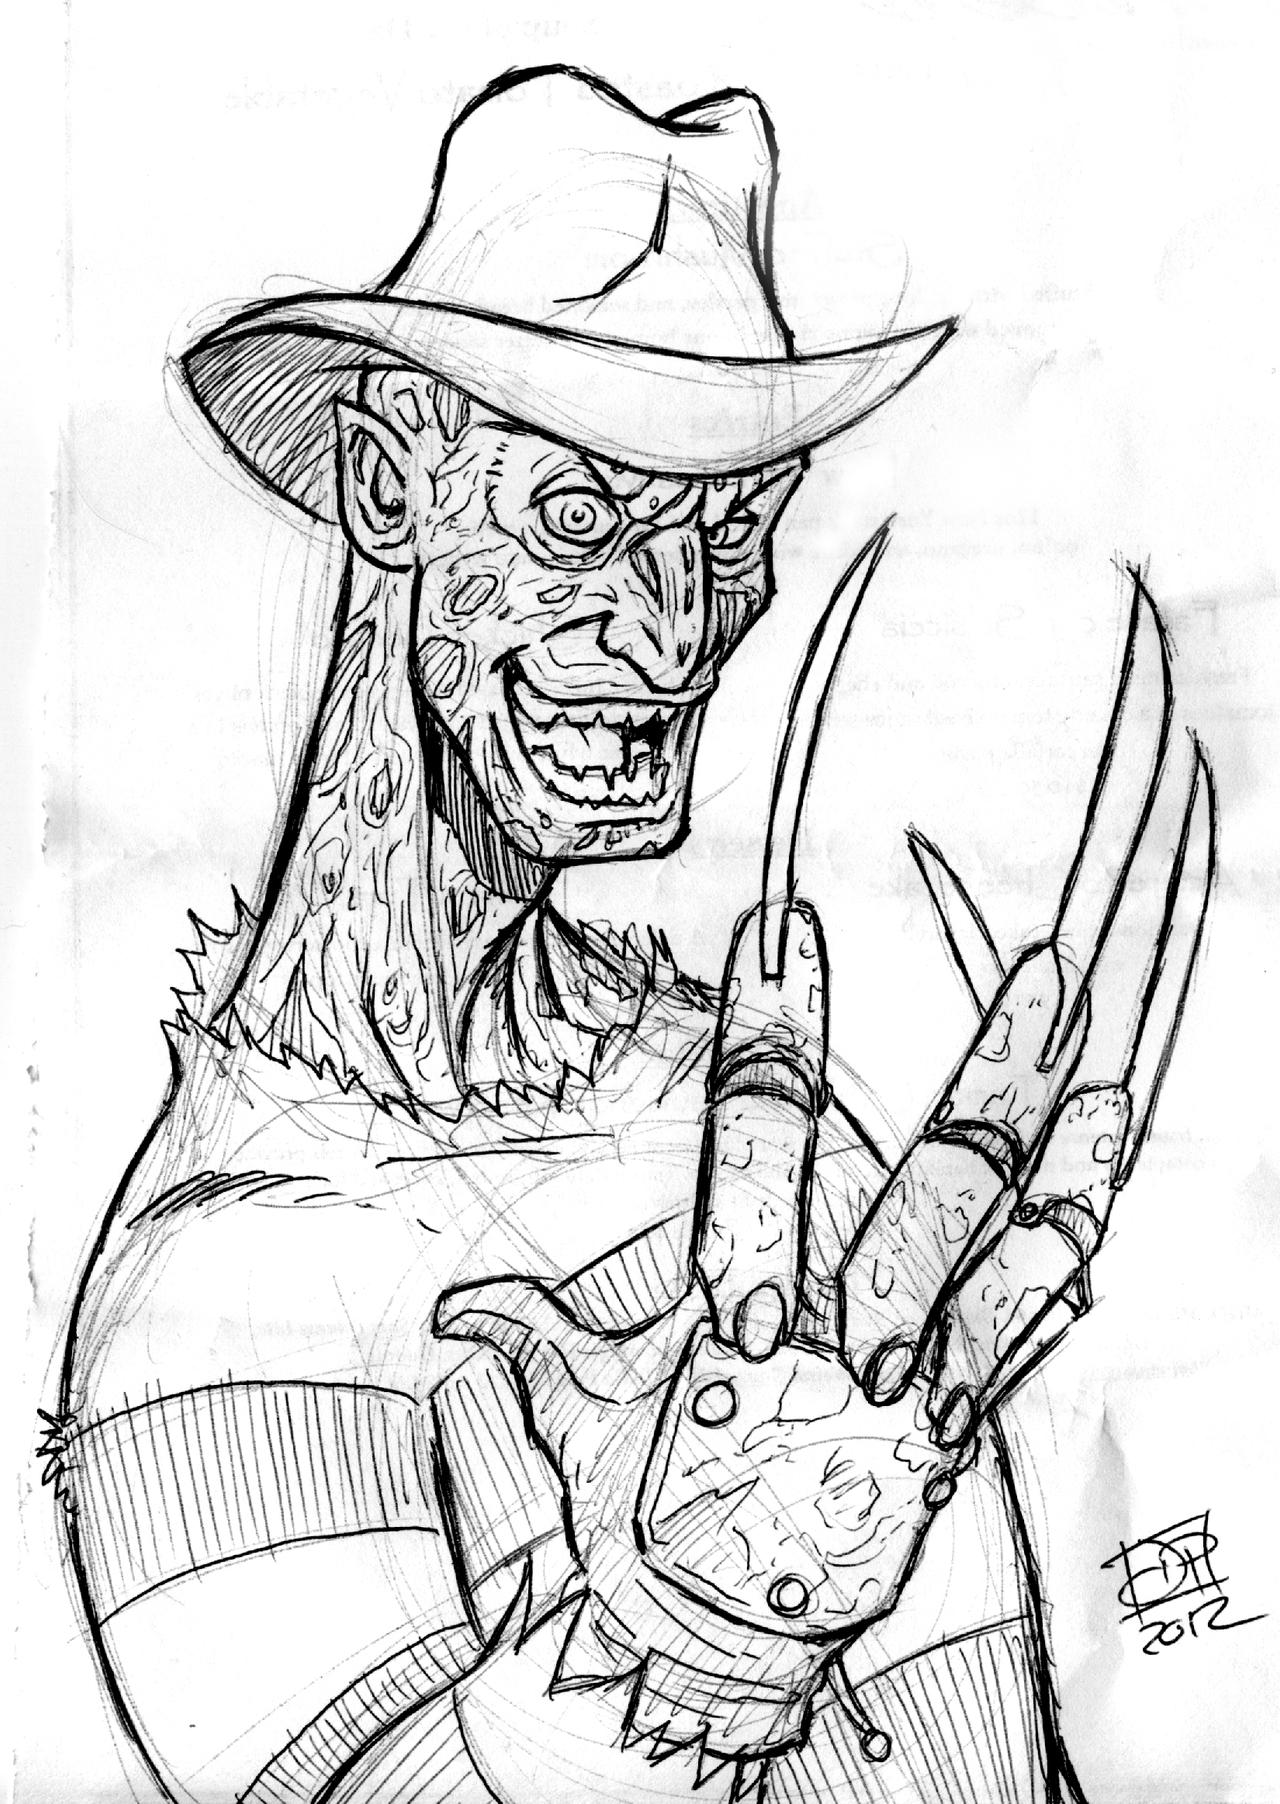 Creative Freddy Kruger Sketches Drawings for Girl.